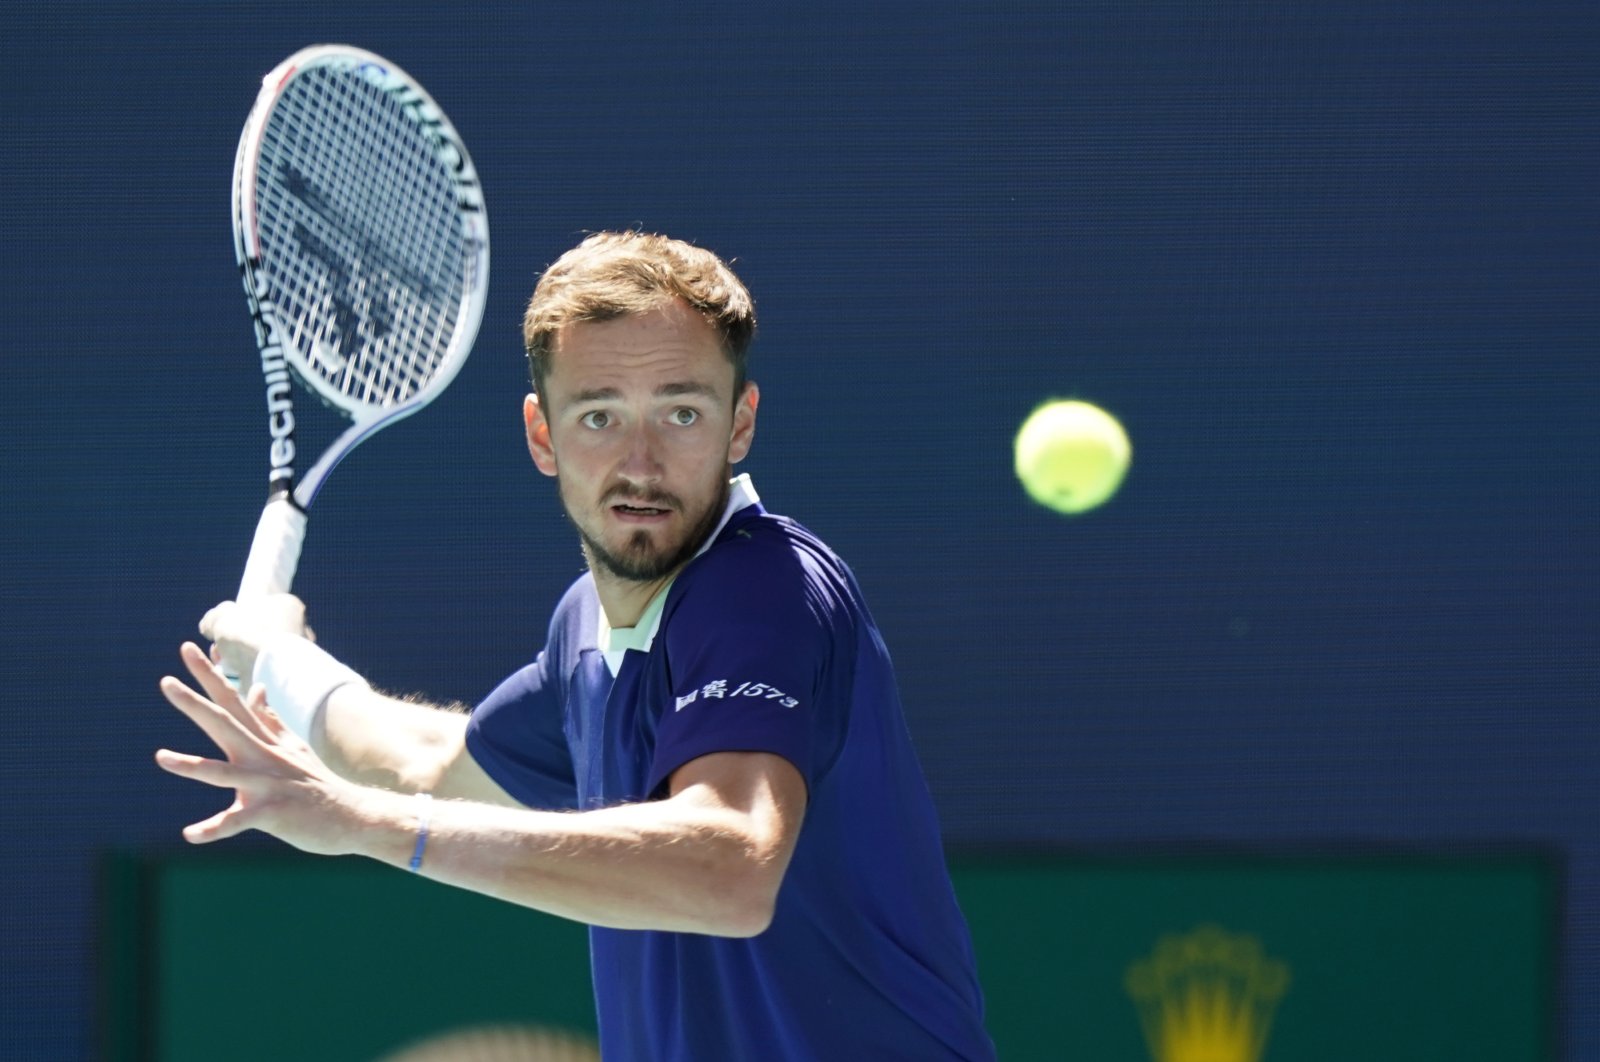 Daniil Medvedev returns a shot from Andy Murray at the Miami Open, Miami, Florida, March 26, 2022. (AP Photo)